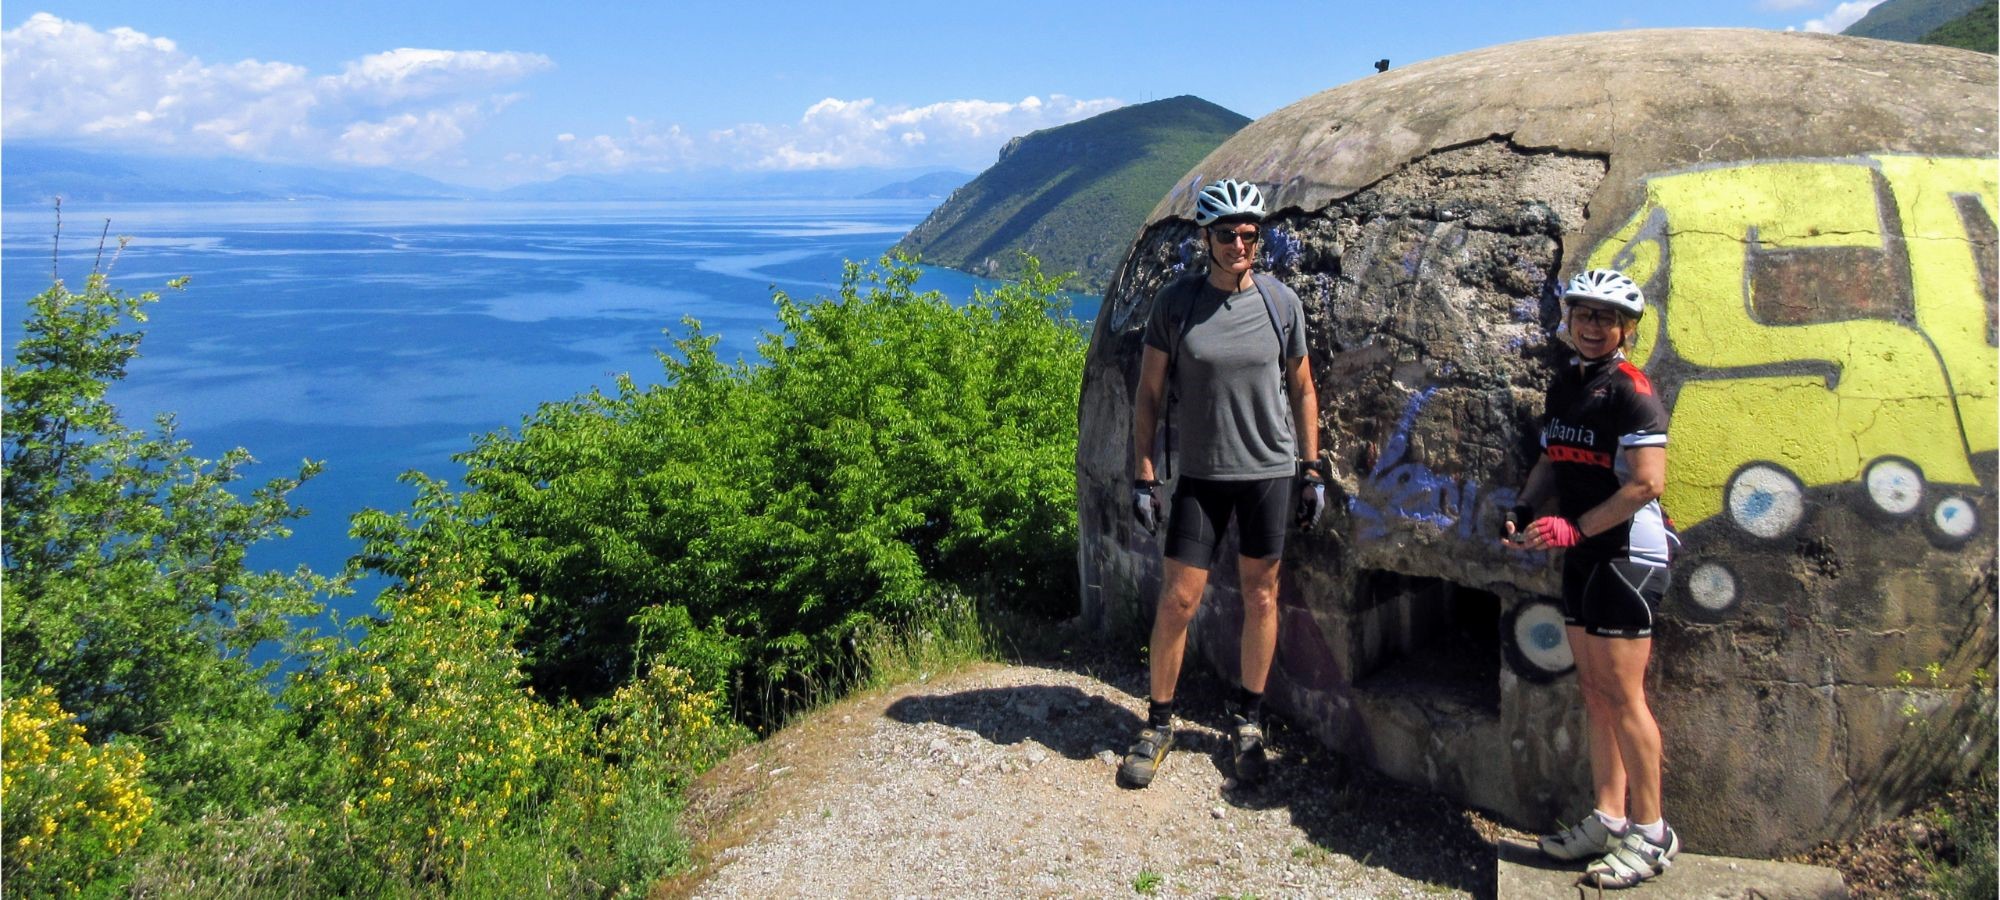 Photos from our Albania - North to South Cycling Holiday